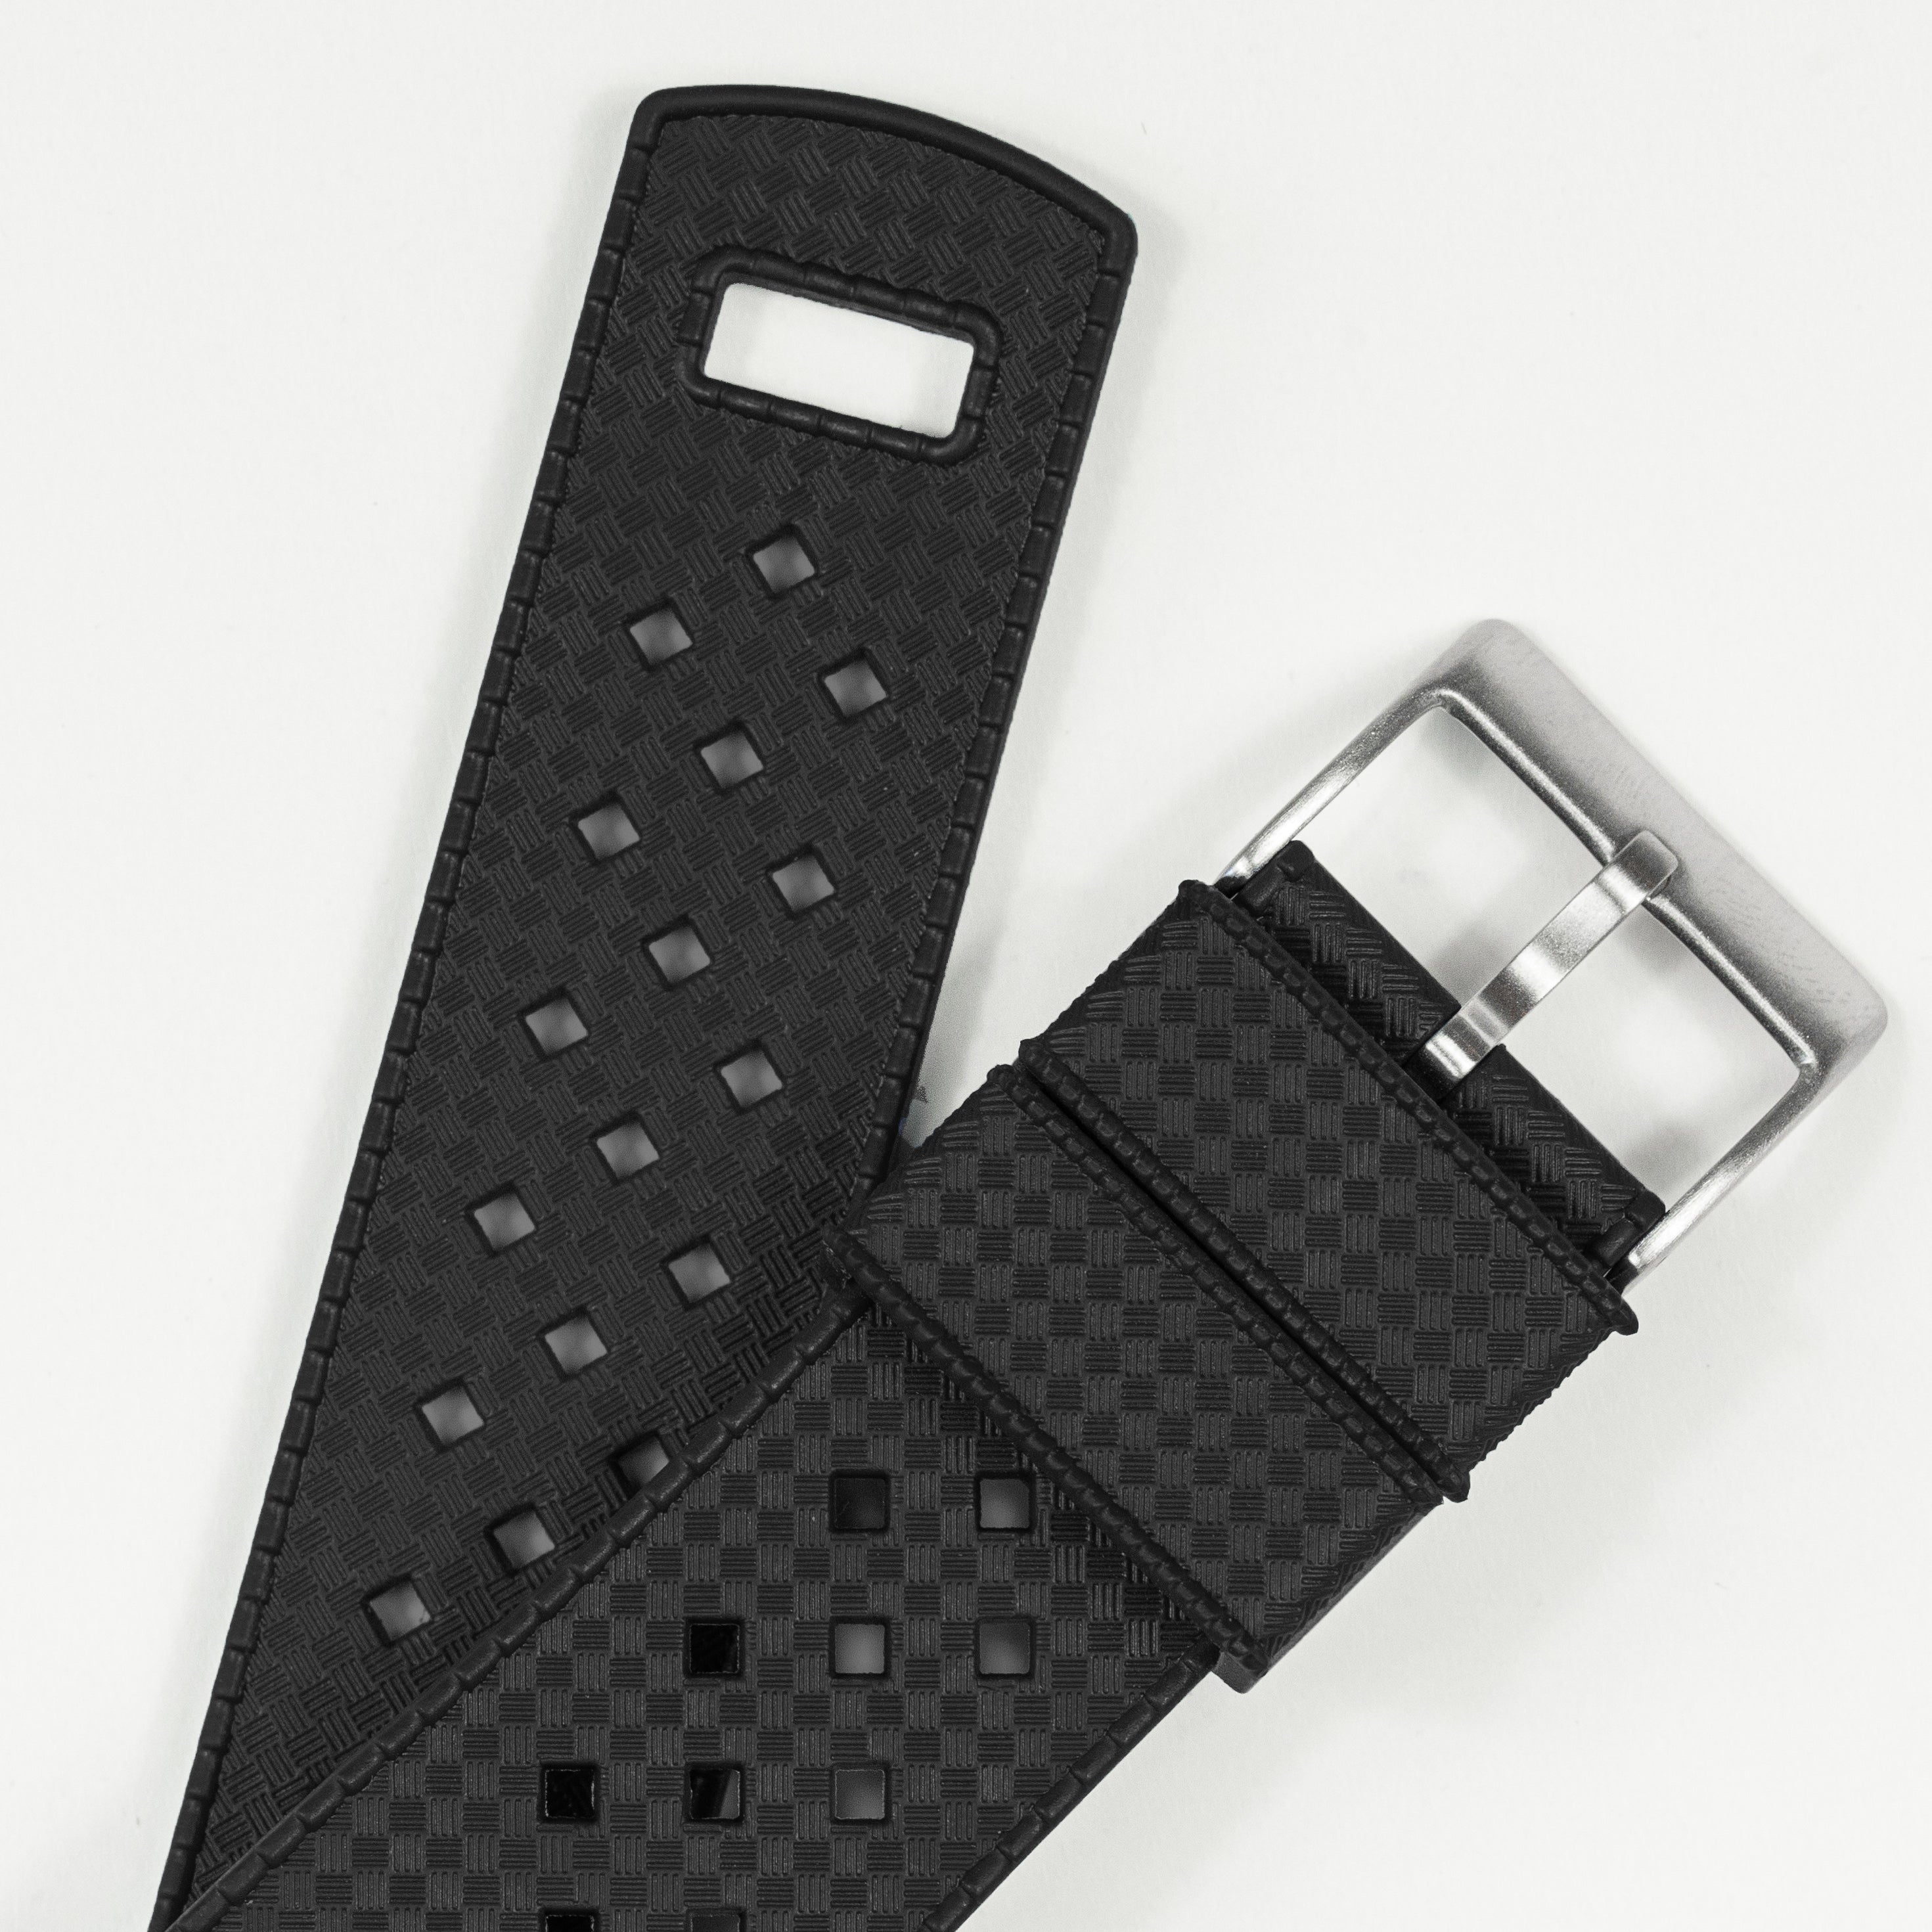 Black Retro Tropical Style Rubber Watch Band